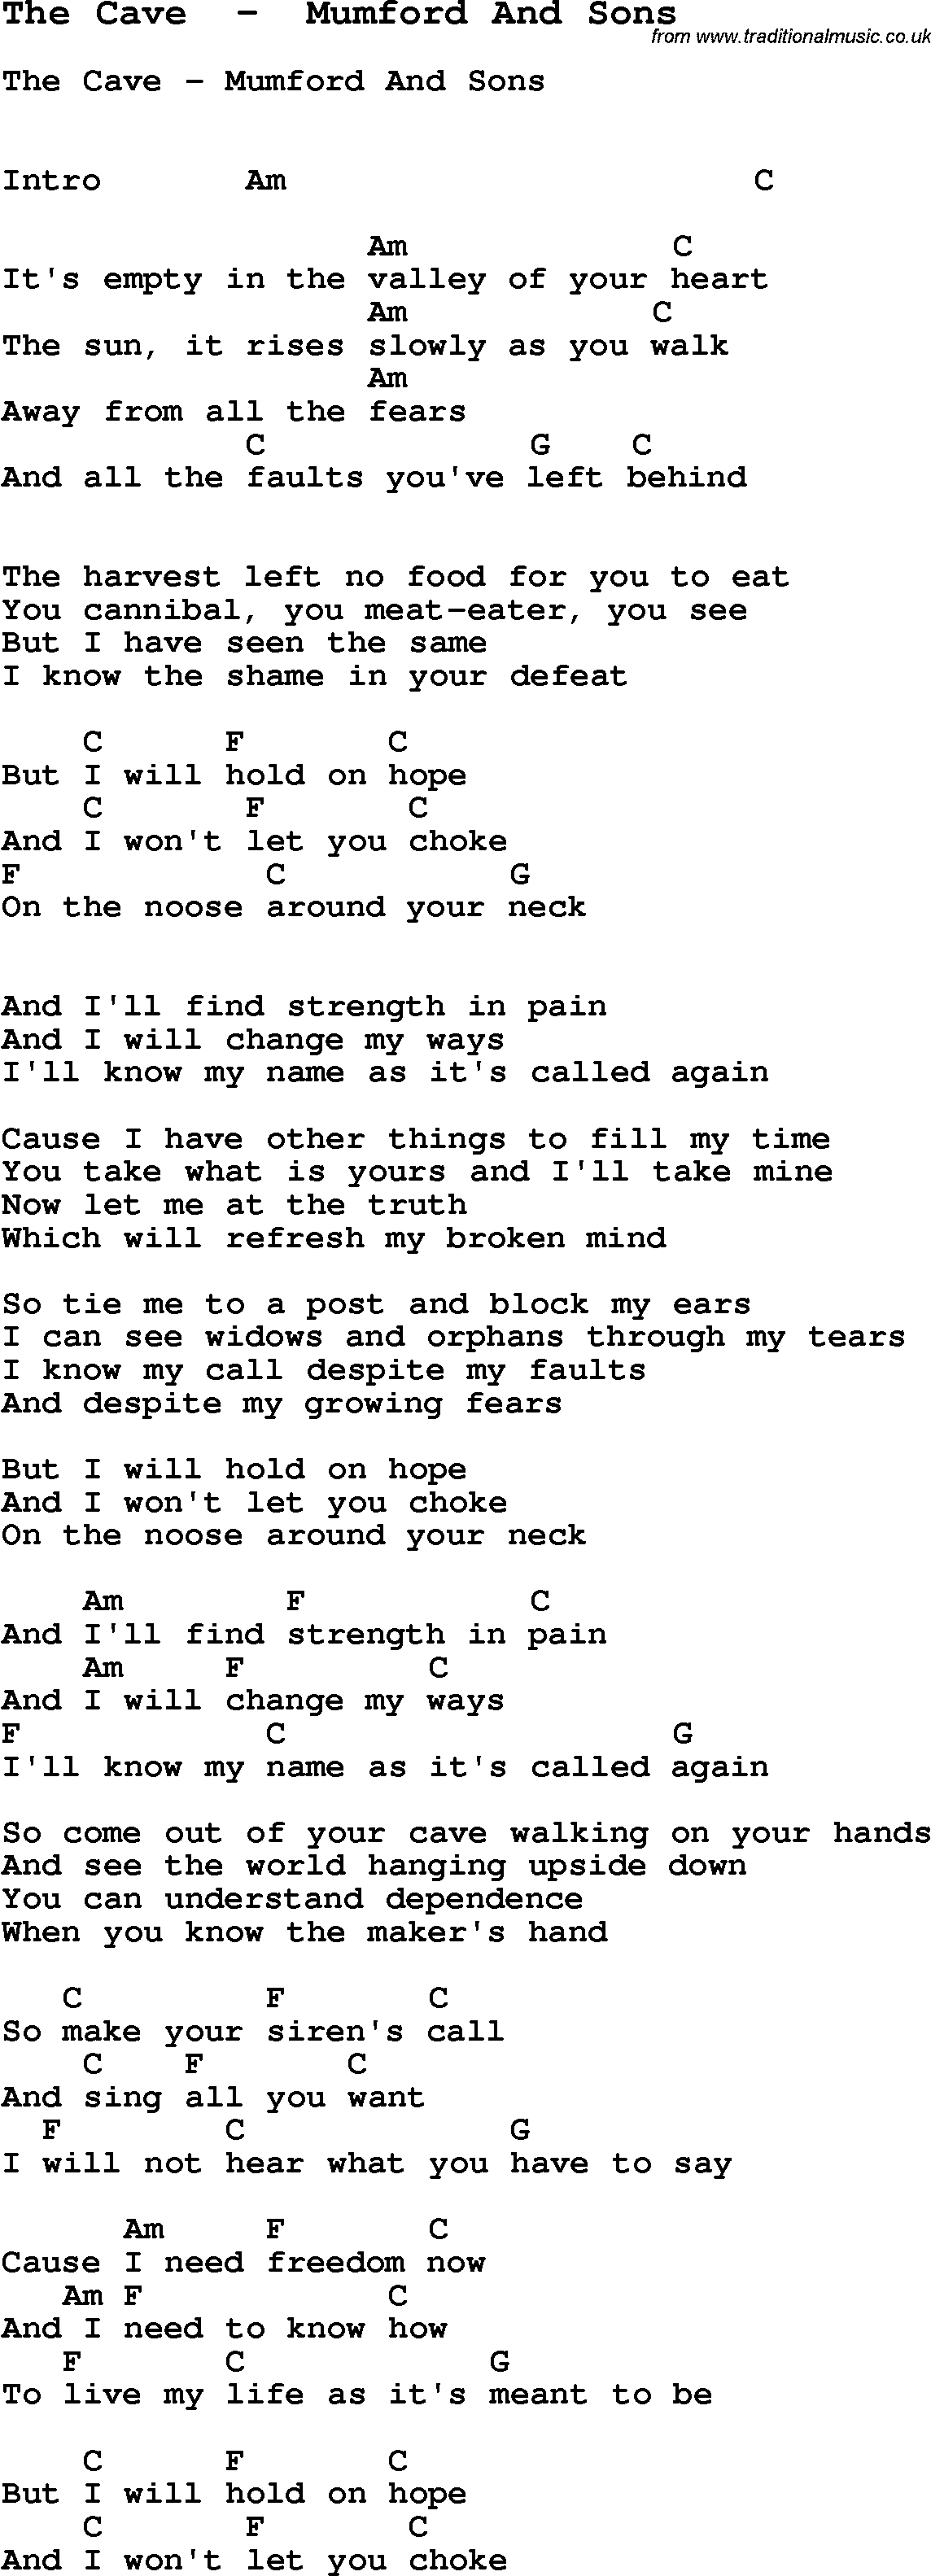 Song The Cave  by  Mumford And Sons, with lyrics for vocal performance and accompaniment chords for Ukulele, Guitar Banjo etc.